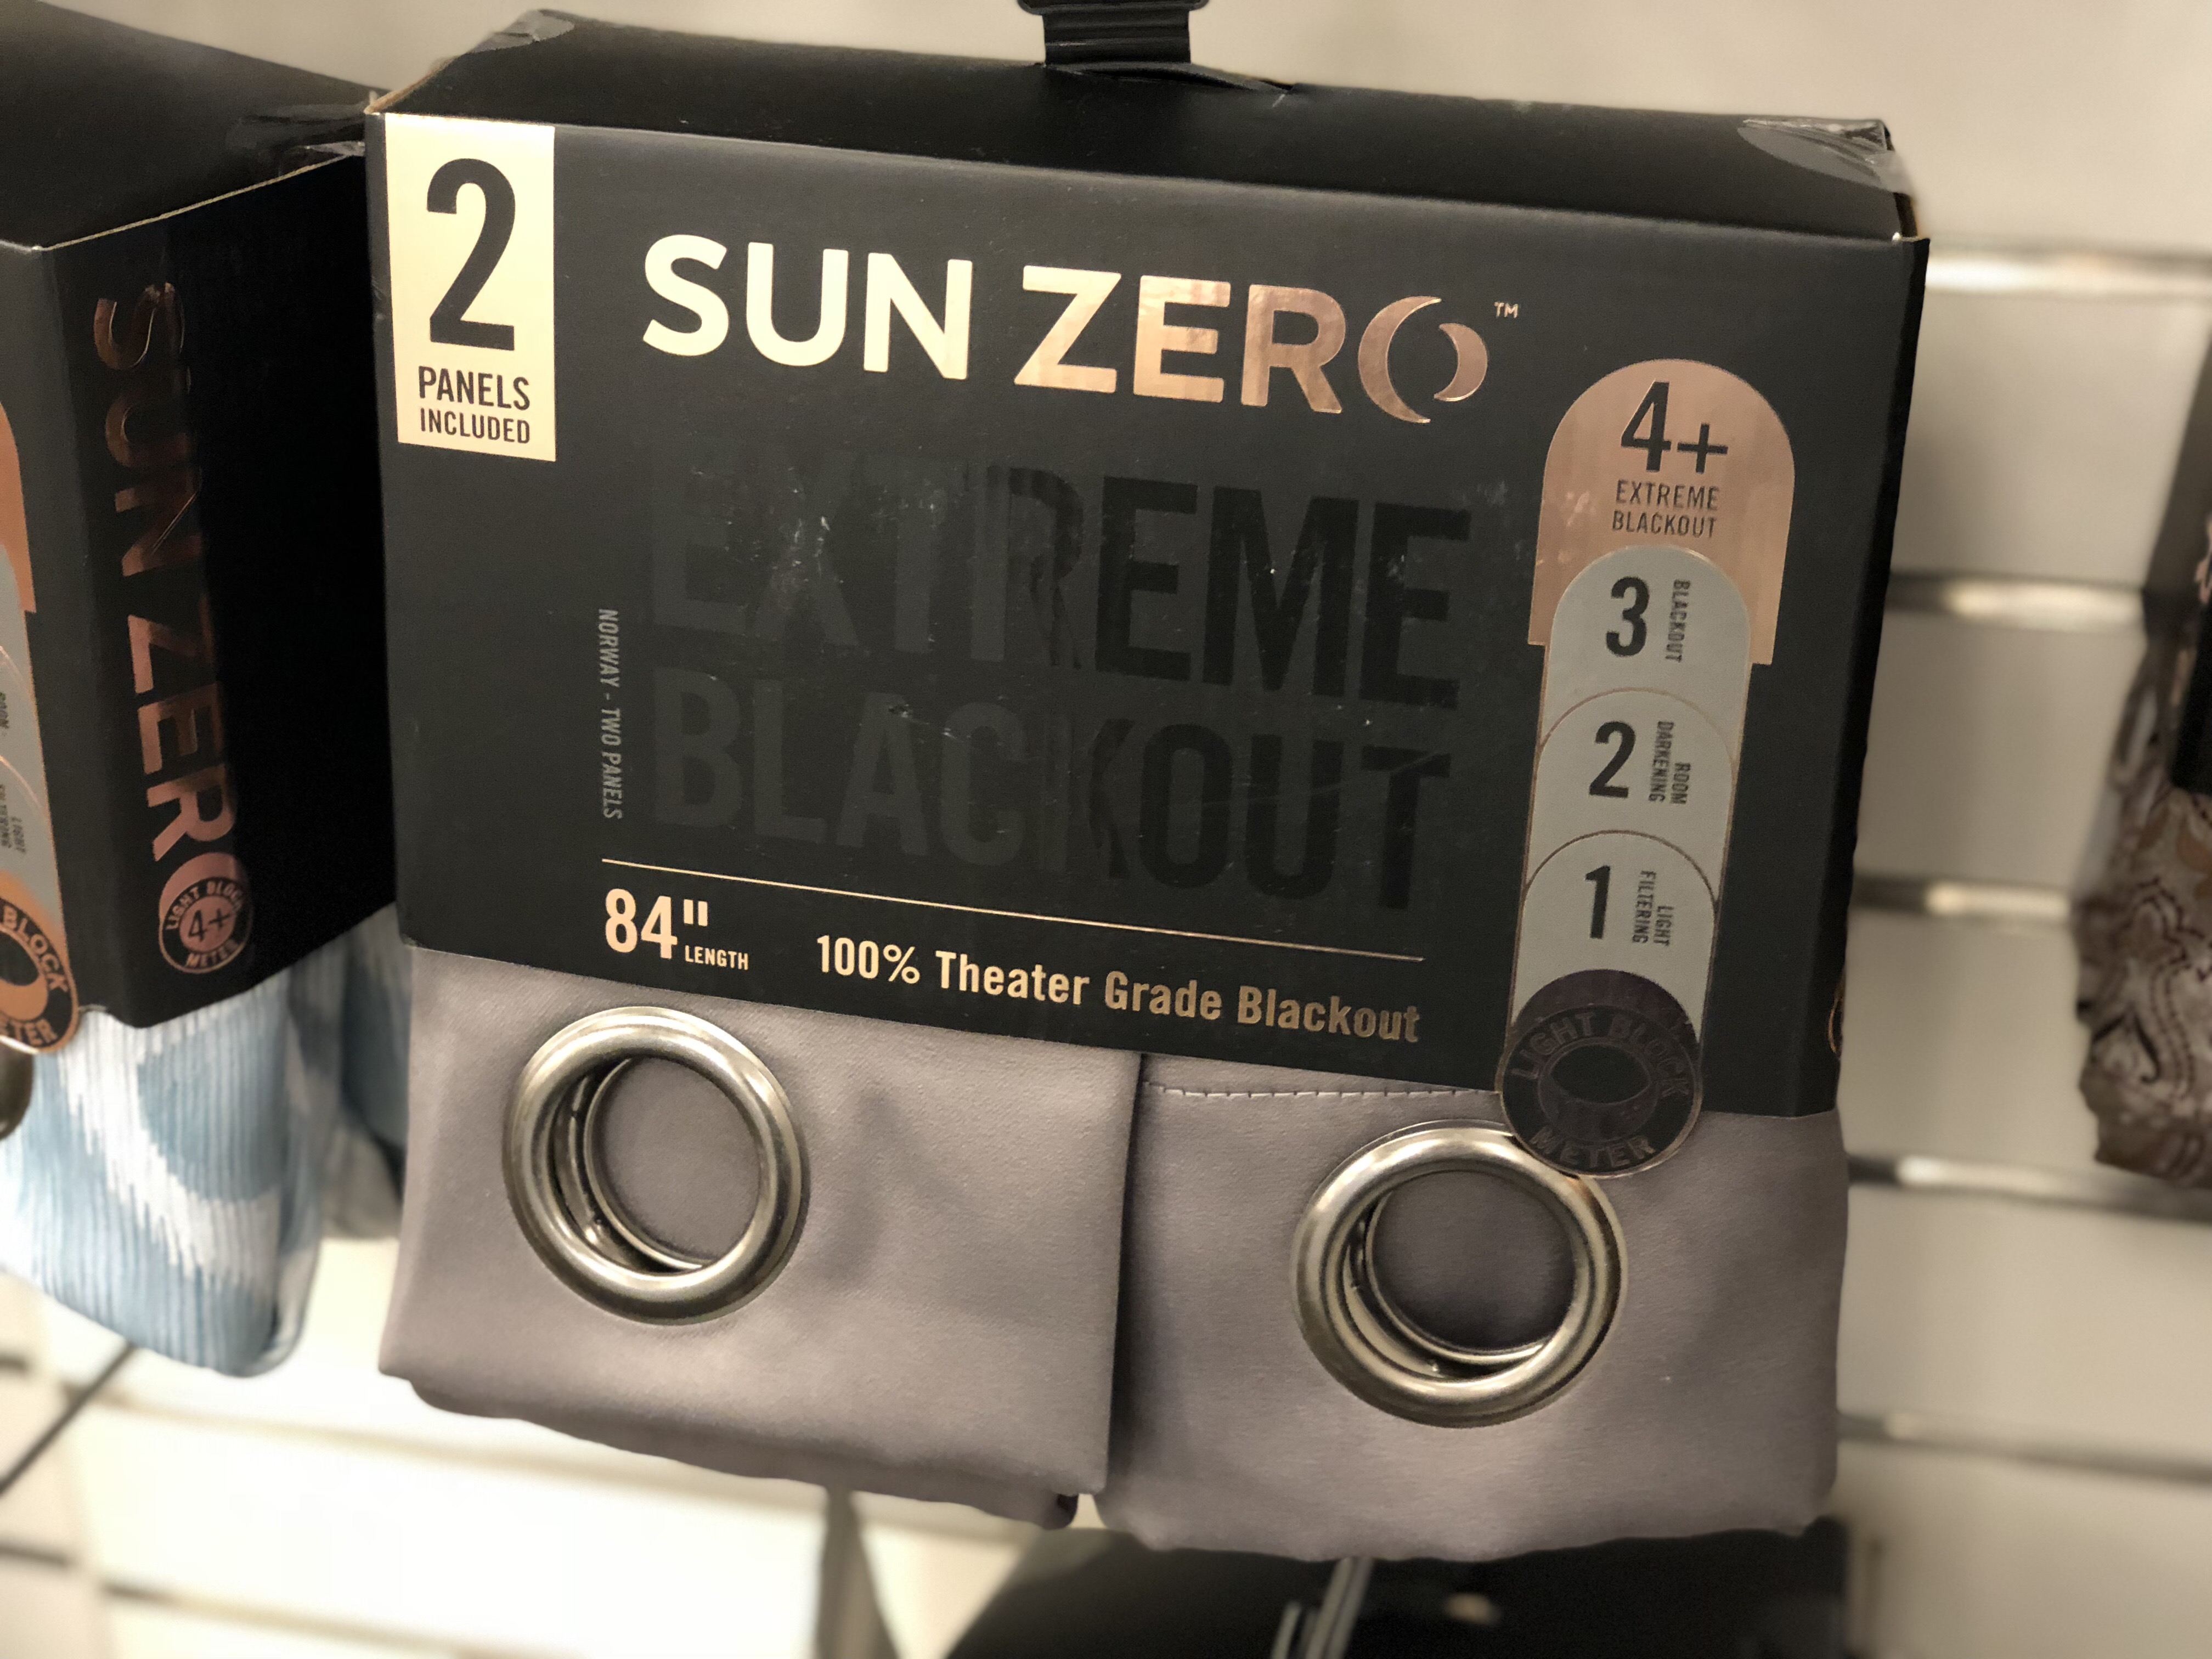 Sun Zero Extreme Blackout Curtains 2-Pack as Low as $14.39 at Kohl's